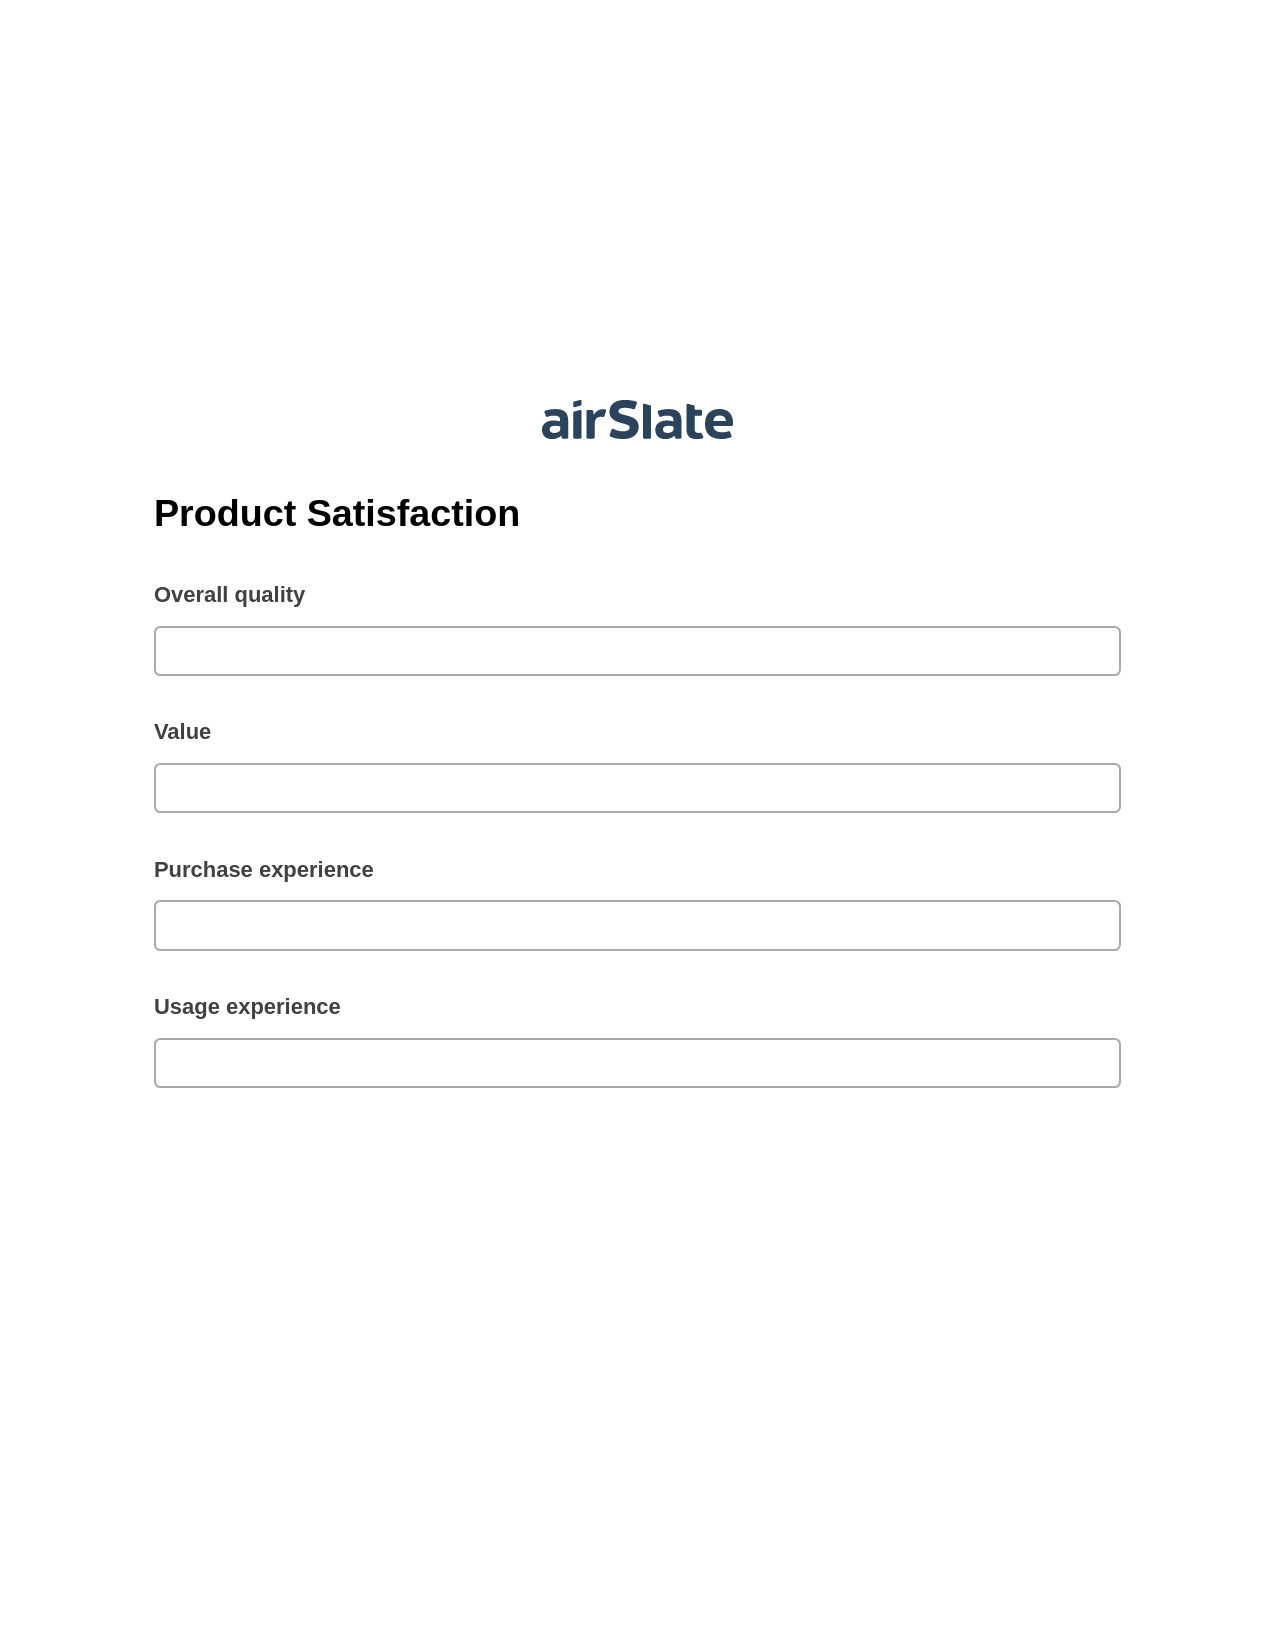 Product Satisfaction Pre-fill from CSV File Bot, Update MS Dynamics 365 Records Bot, Dropbox Bot